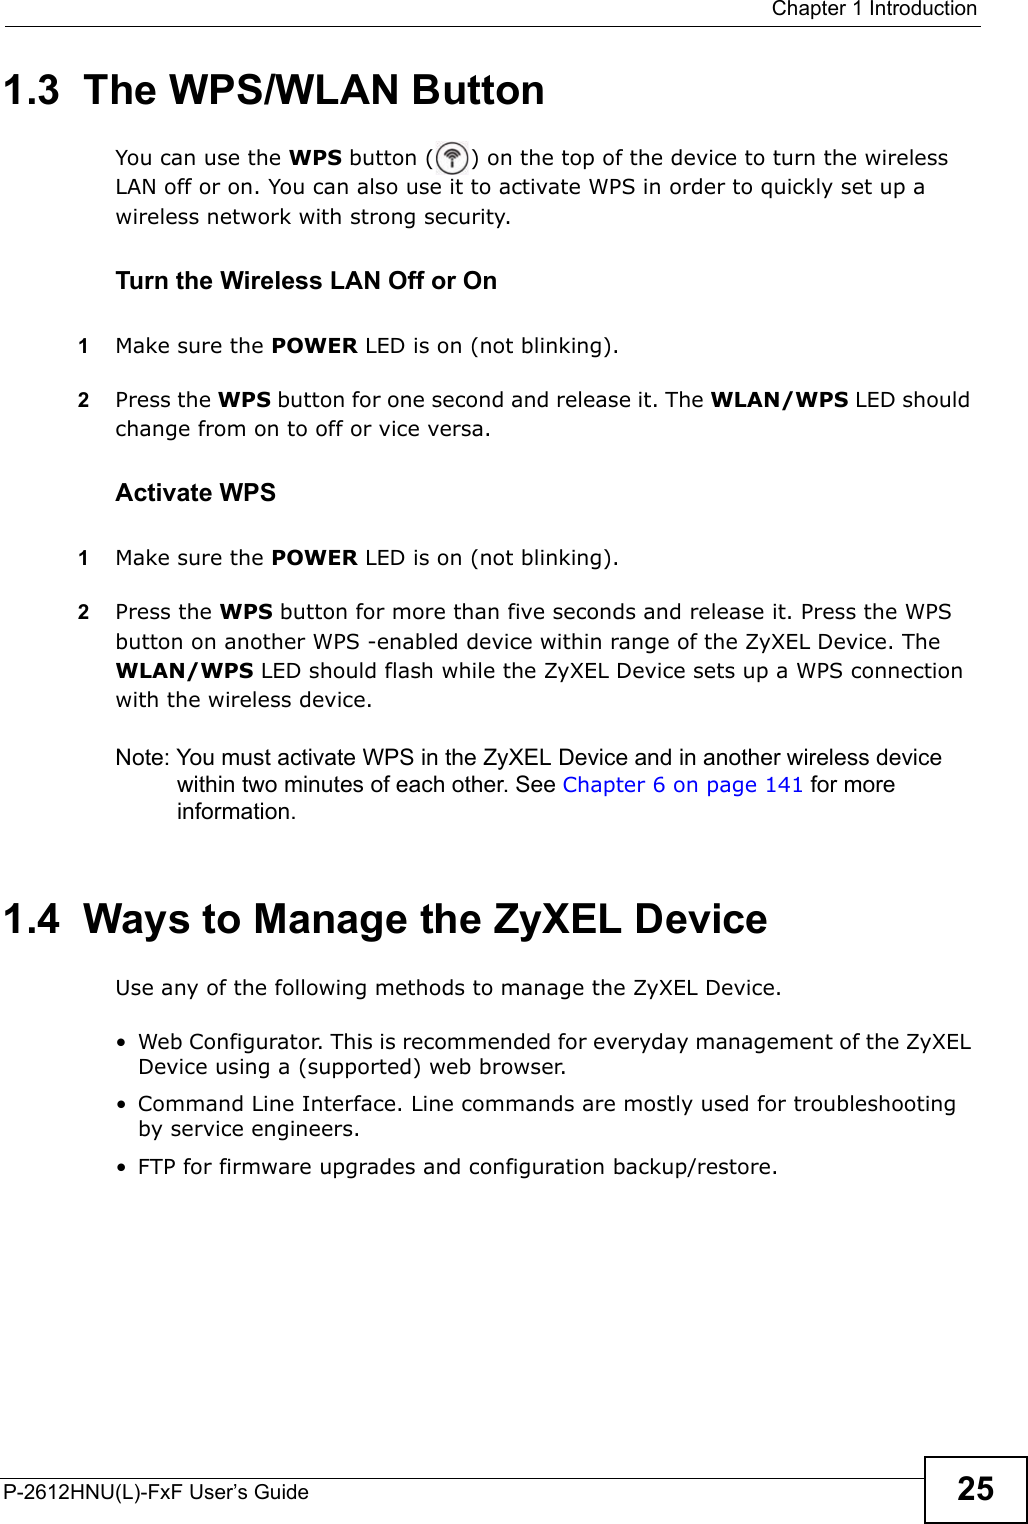  Chapter 1 IntroductionP-2612HNU(L)-FxF User’s Guide 251.3  The WPS/WLAN ButtonYou can use the WPS button ( ) on the top of the device to turn the wireless LAN off or on. You can also use it to activate WPS in order to quickly set up a wireless network with strong security.Turn the Wireless LAN Off or On1Make sure the POWER LED is on (not blinking).2Press the WPS button for one second and release it. The WLAN/WPS LED shouldchange from on to off or vice versa. Activate WPS1Make sure the POWER LED is on (not blinking).2Press the WPS button for more than five seconds and release it. Press the WPS button on another WPS -enabled device within range of the ZyXEL Device. The WLAN/WPS LED should flash while the ZyXEL Device sets up a WPS connection with the wireless device. Note: You must activate WPS in the ZyXEL Device and in another wireless devicewithin two minutes of each other. See Chapter 6 on page 141 for more information.1.4  Ways to Manage the ZyXEL DeviceUse any of the following methods to manage the ZyXEL Device.• Web Configurator. This is recommended for everyday management of the ZyXEL Device using a (supported) web browser.• Command Line Interface. Line commands are mostly used for troubleshooting by service engineers.• FTP for firmware upgrades and configuration backup/restore.